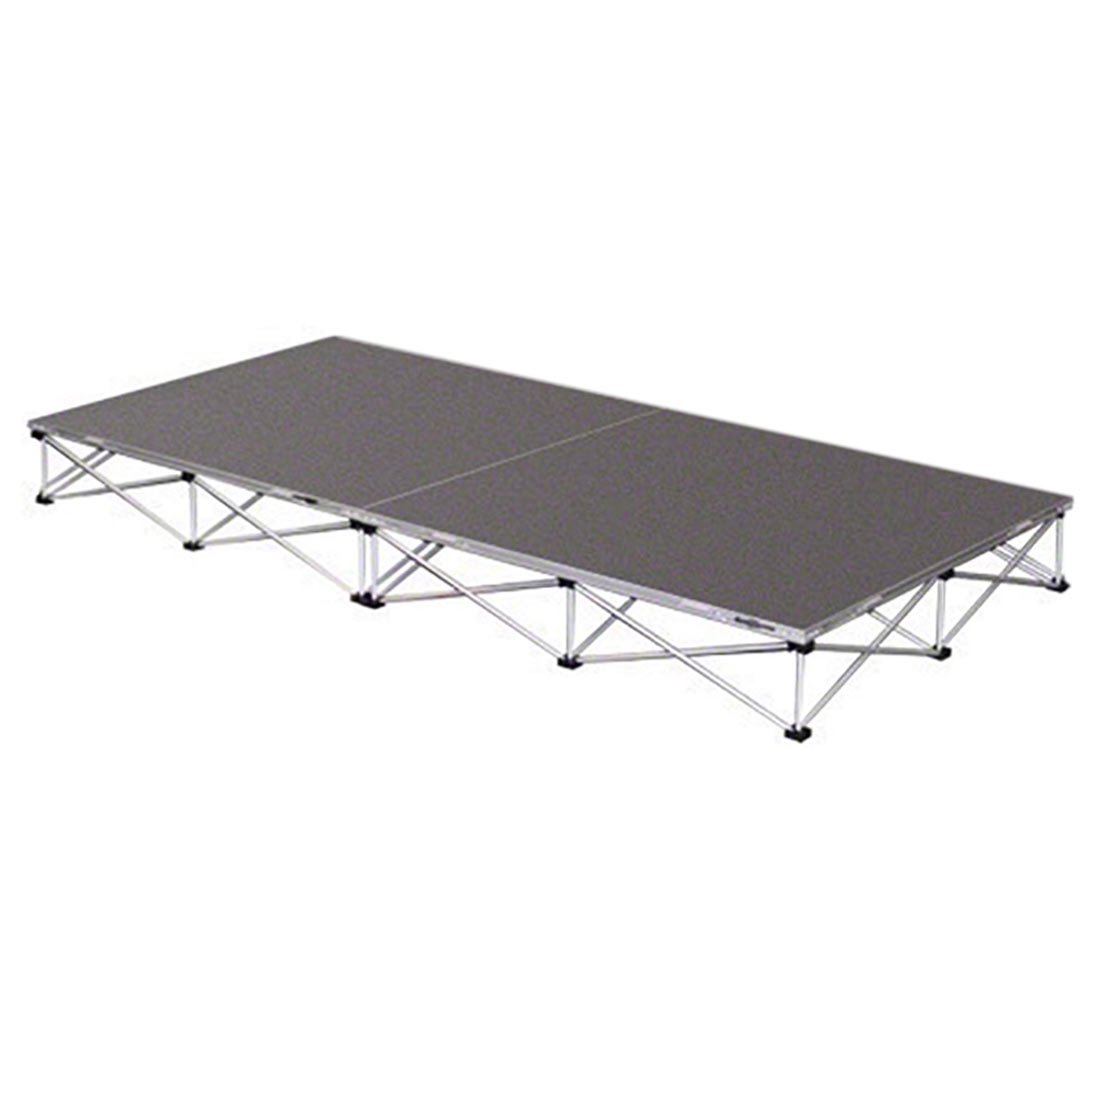 4'X8' CARPETED DJ PLATFORM 16 HIGH - COMES WITH 30 HIGH FOLDING TABLE